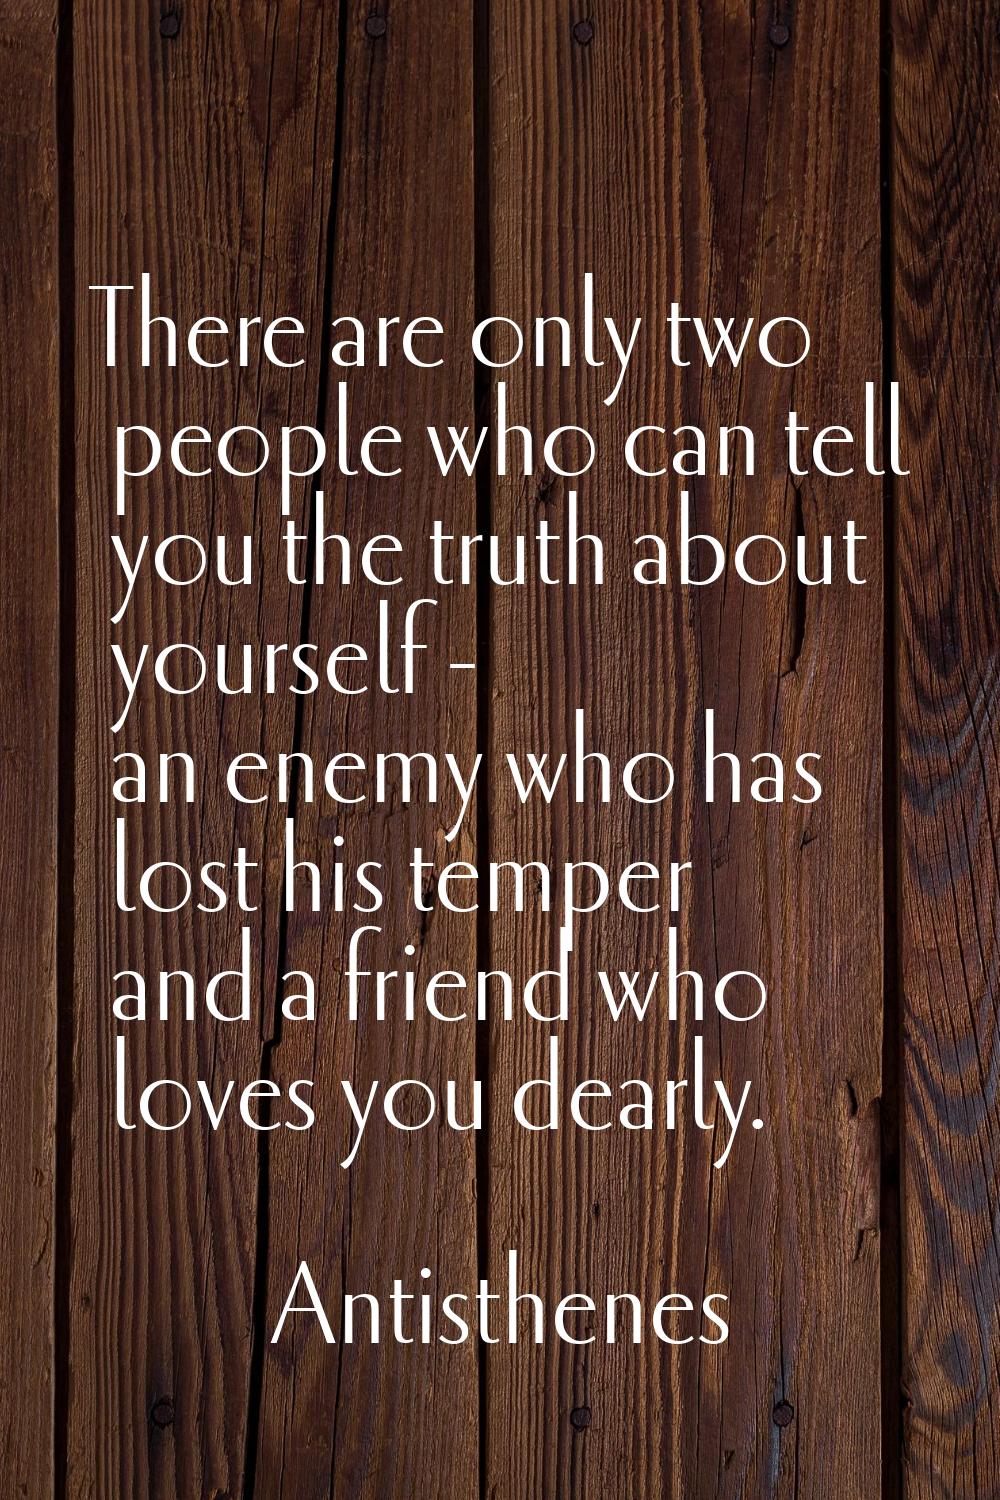 There are only two people who can tell you the truth about yourself - an enemy who has lost his tem